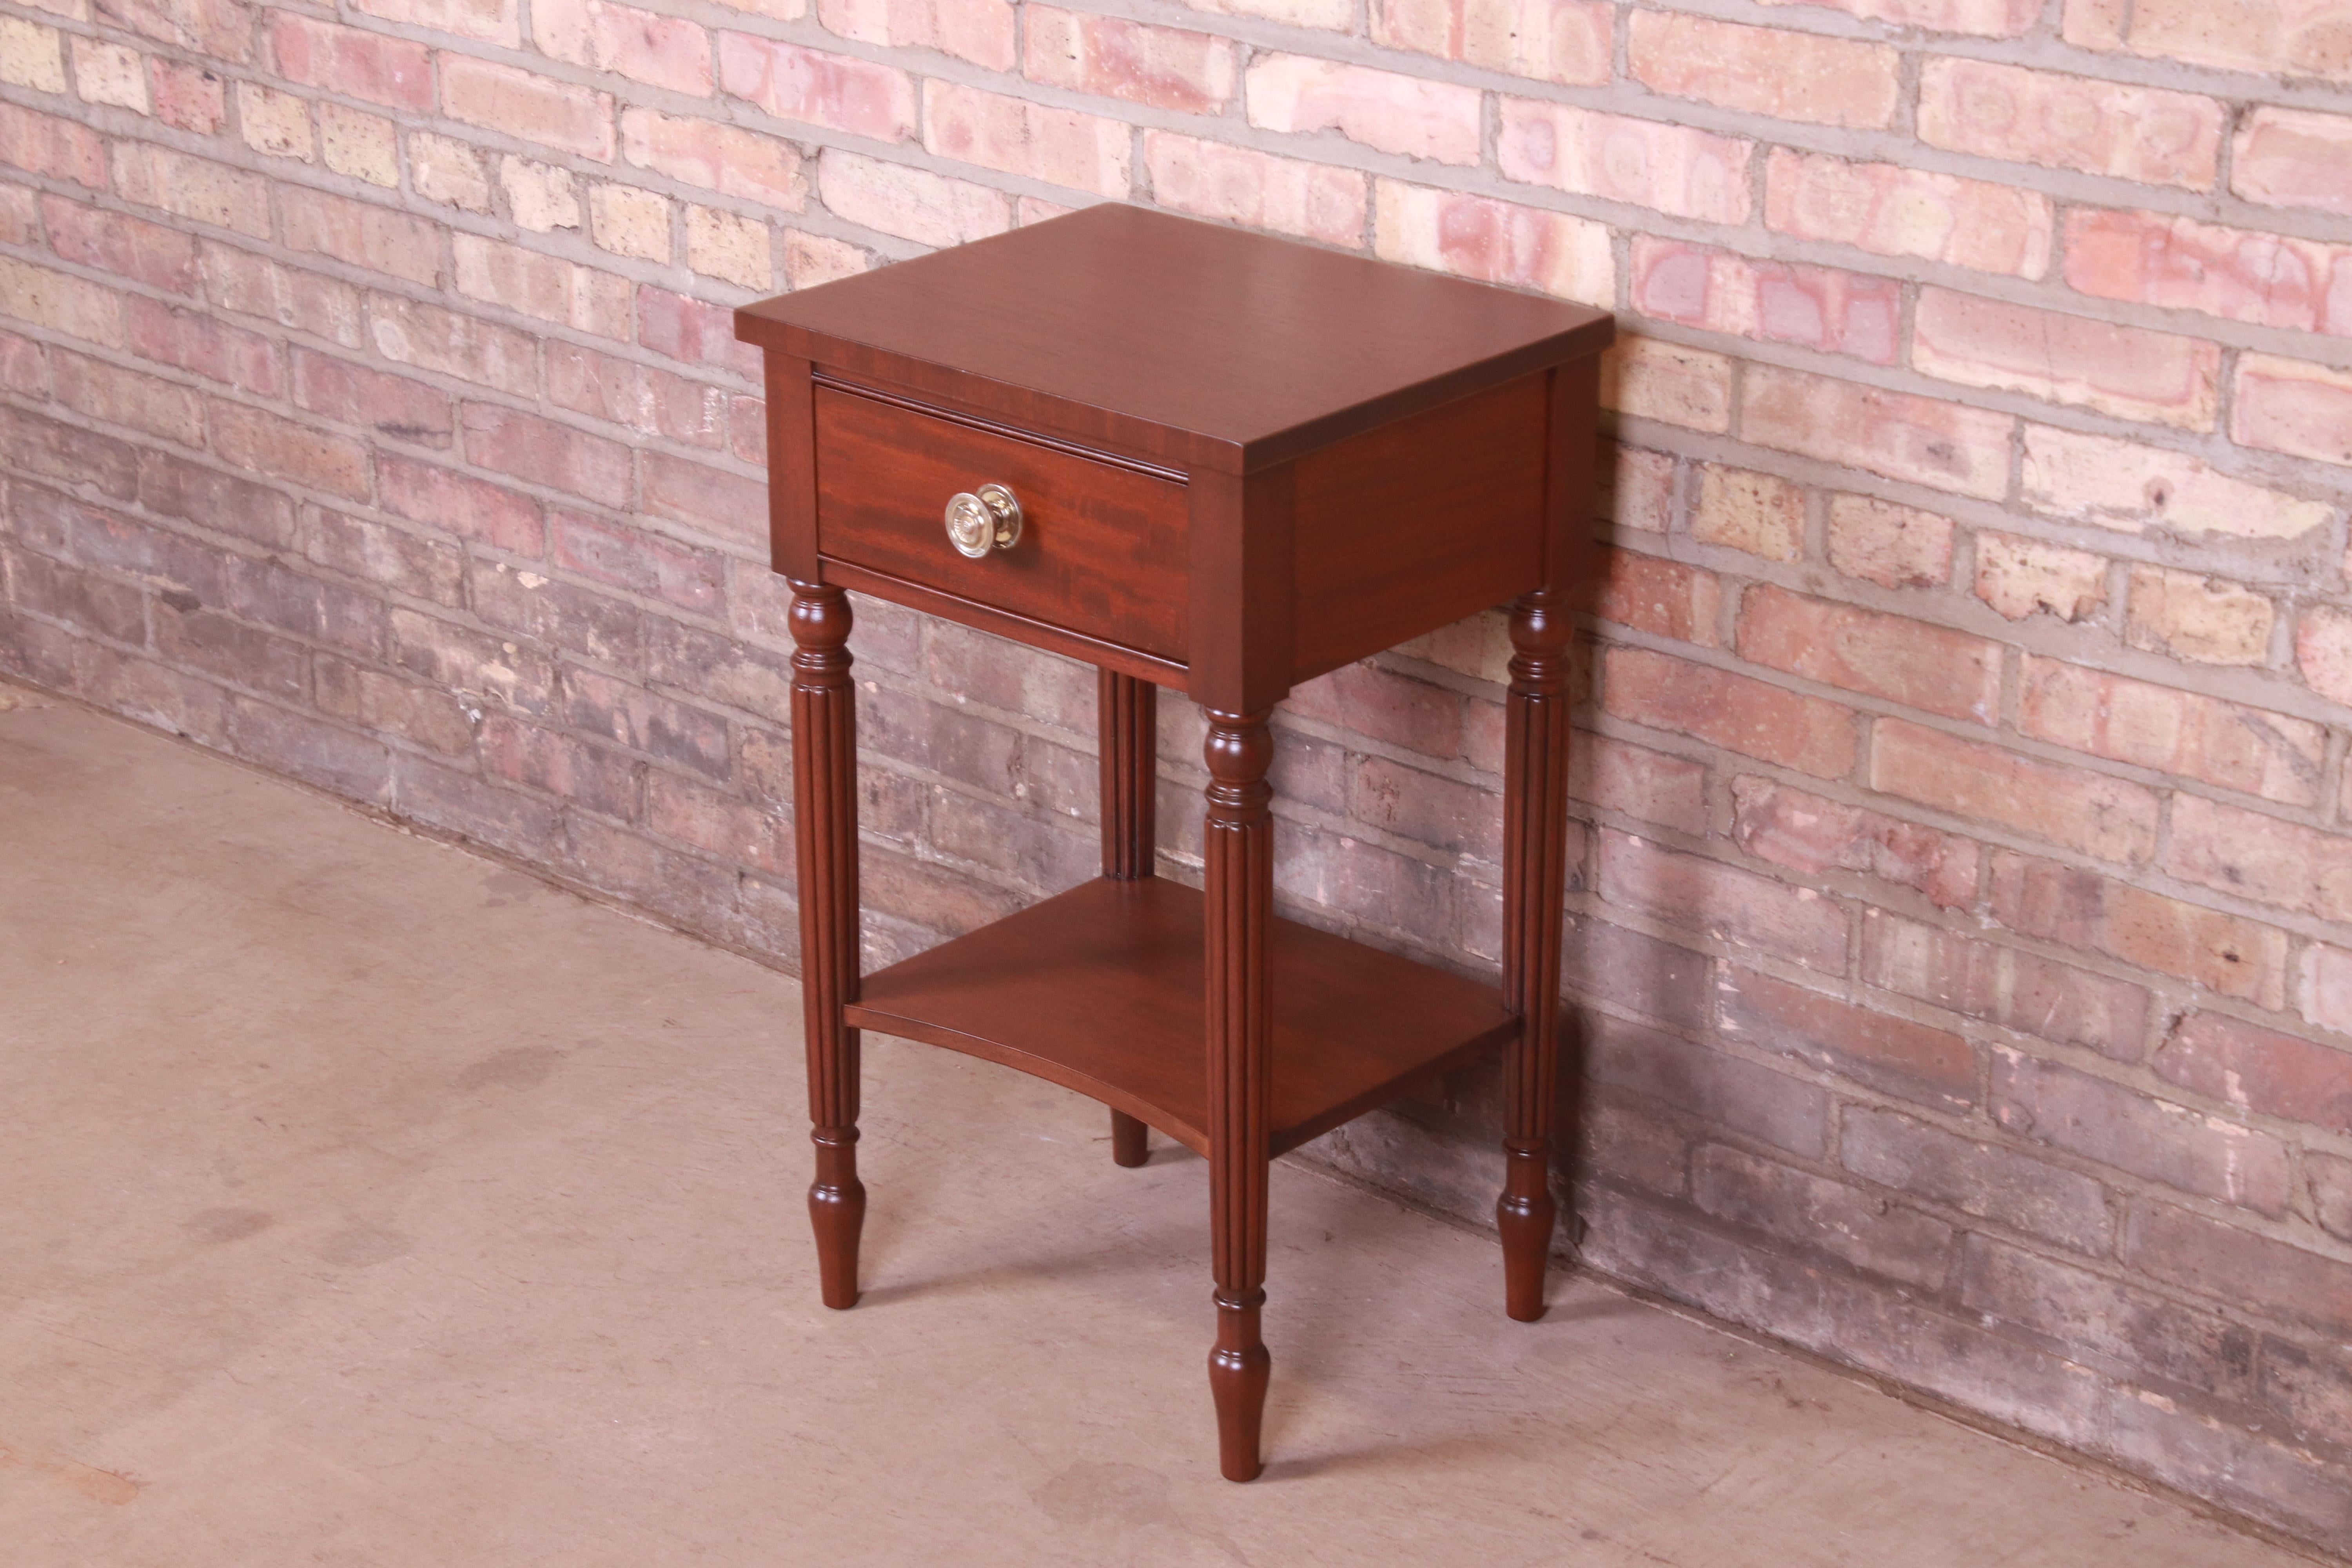 20th Century Kindel Furniture French Regency Louis XVI Bedside Table, Newly Refinished